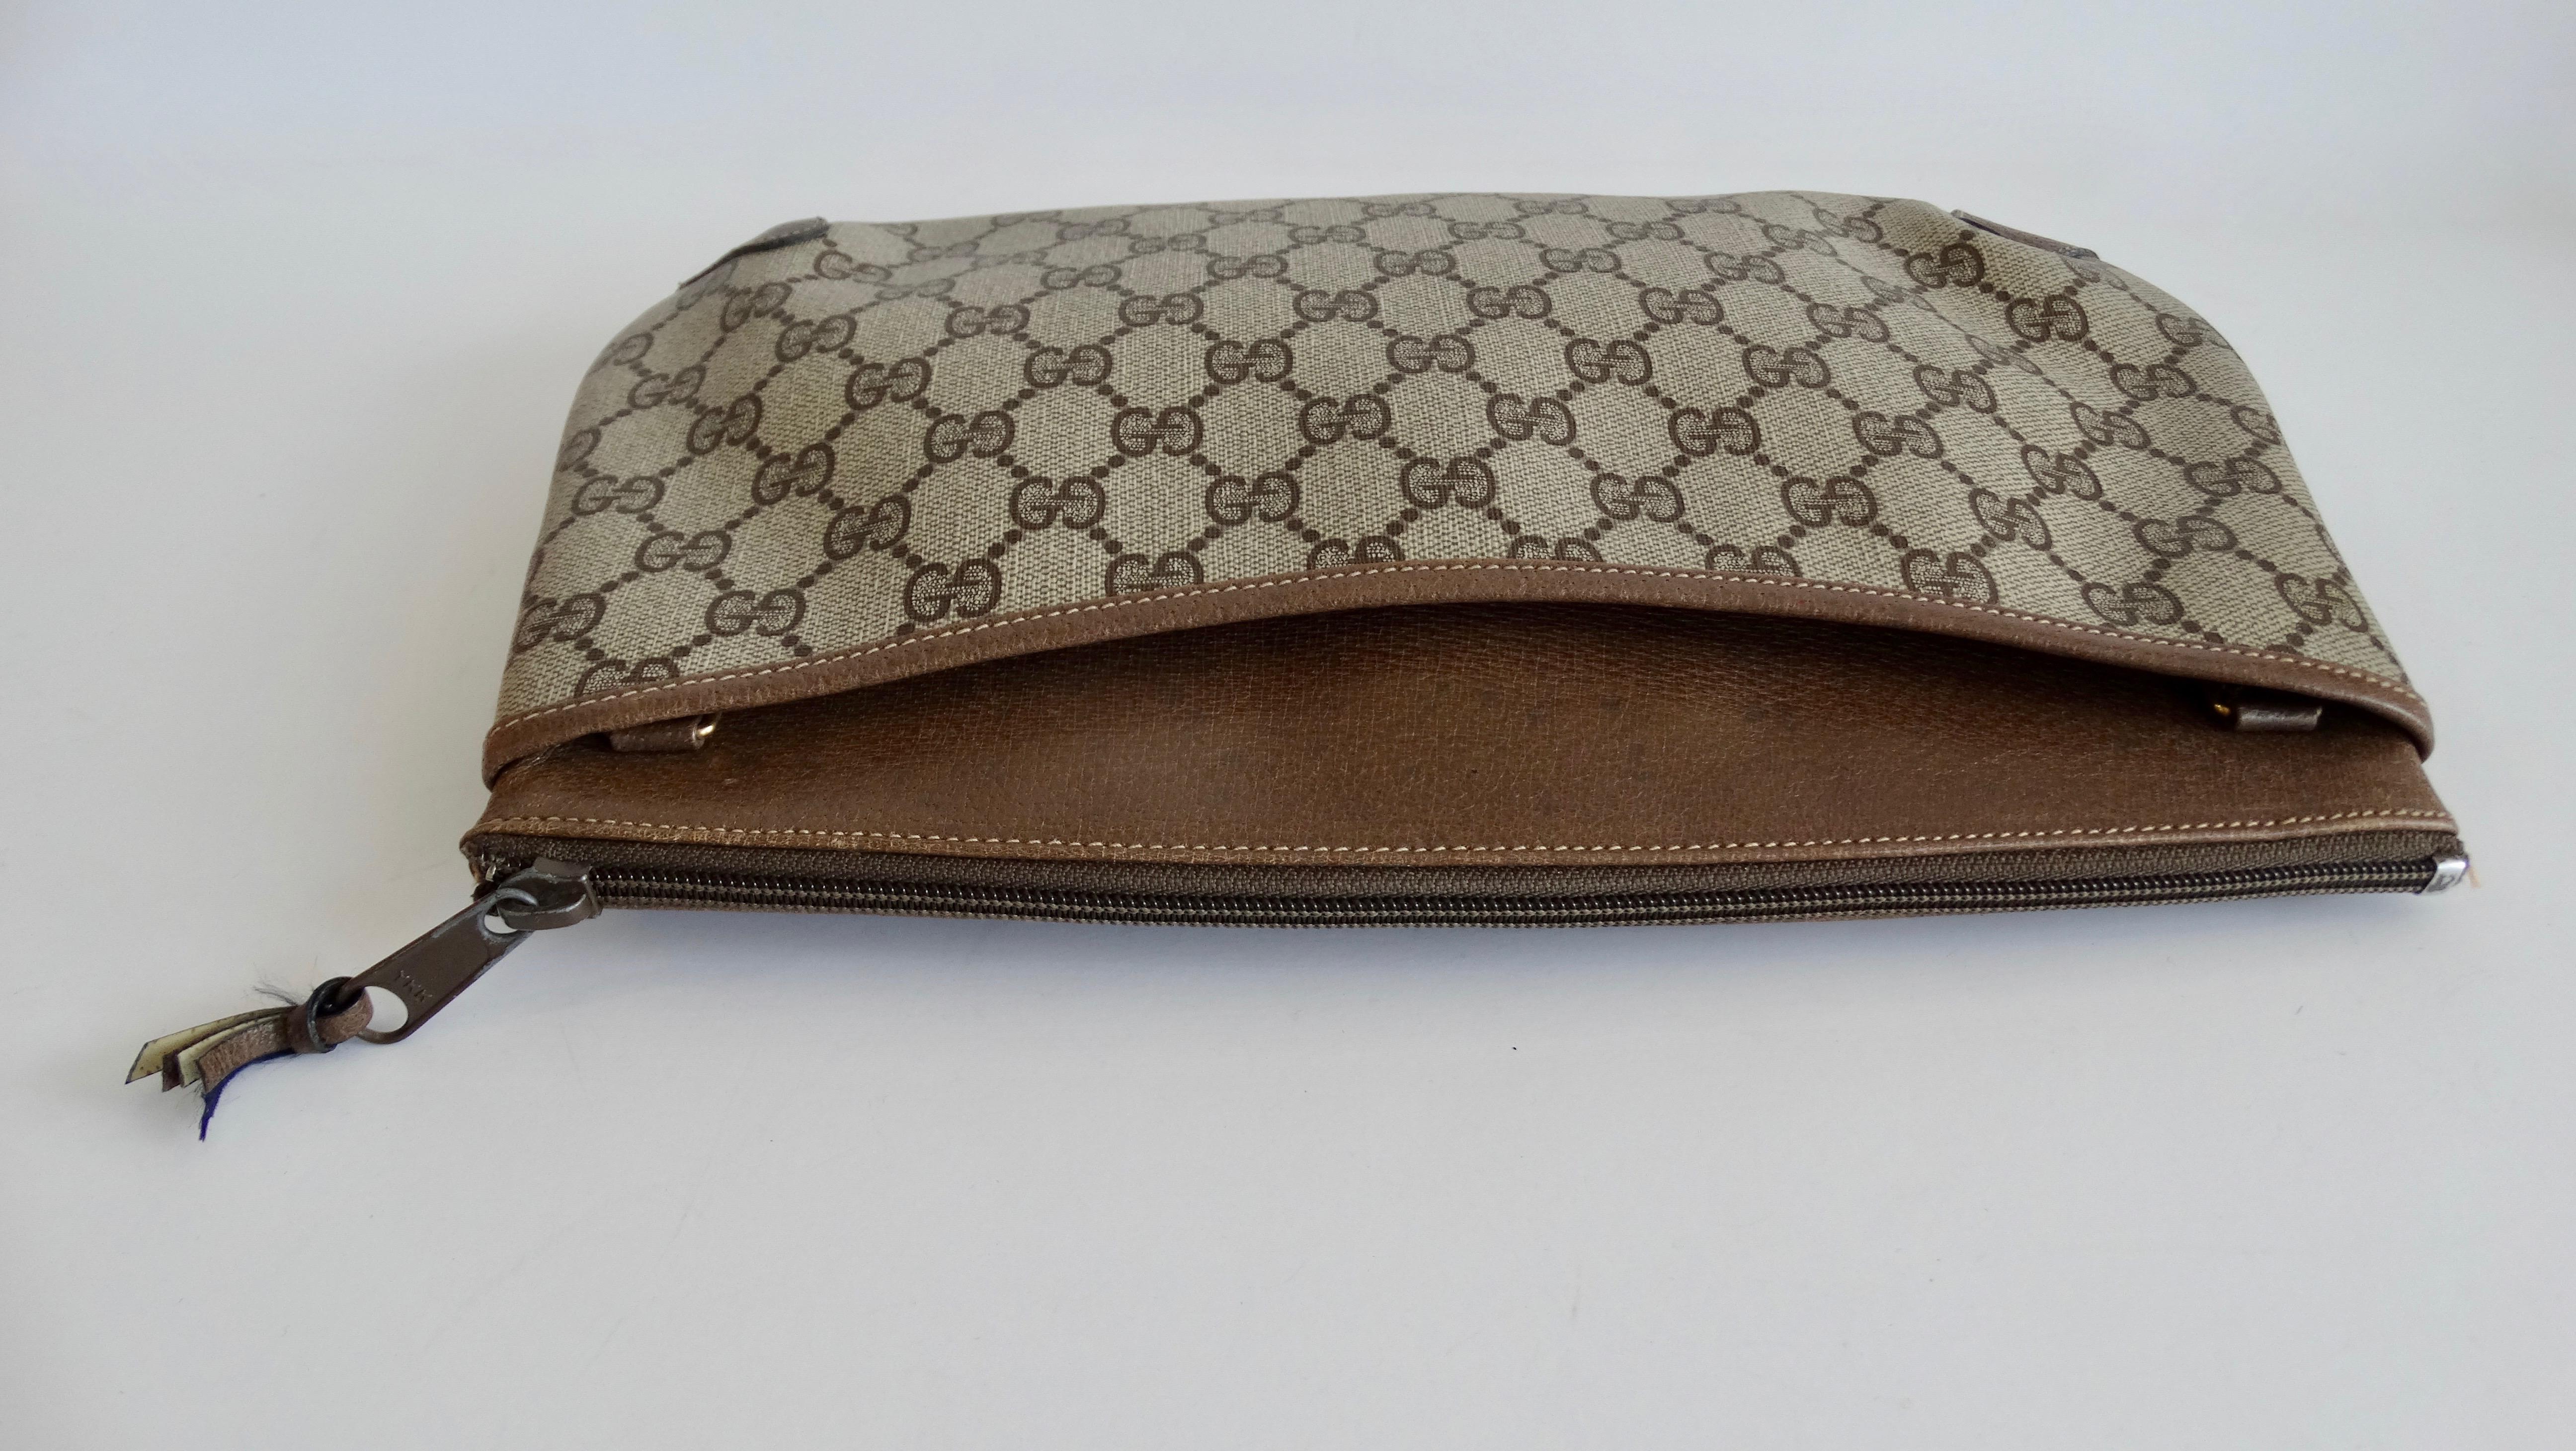 Carry around a piece of Gucci fashion history with this adorable clutch! Circa 1980s, this clutch is from Gucci's accessory collection, which launched in 1979 and produced until the early 90s. This clutch features the iconic Gucci monogram pattern,